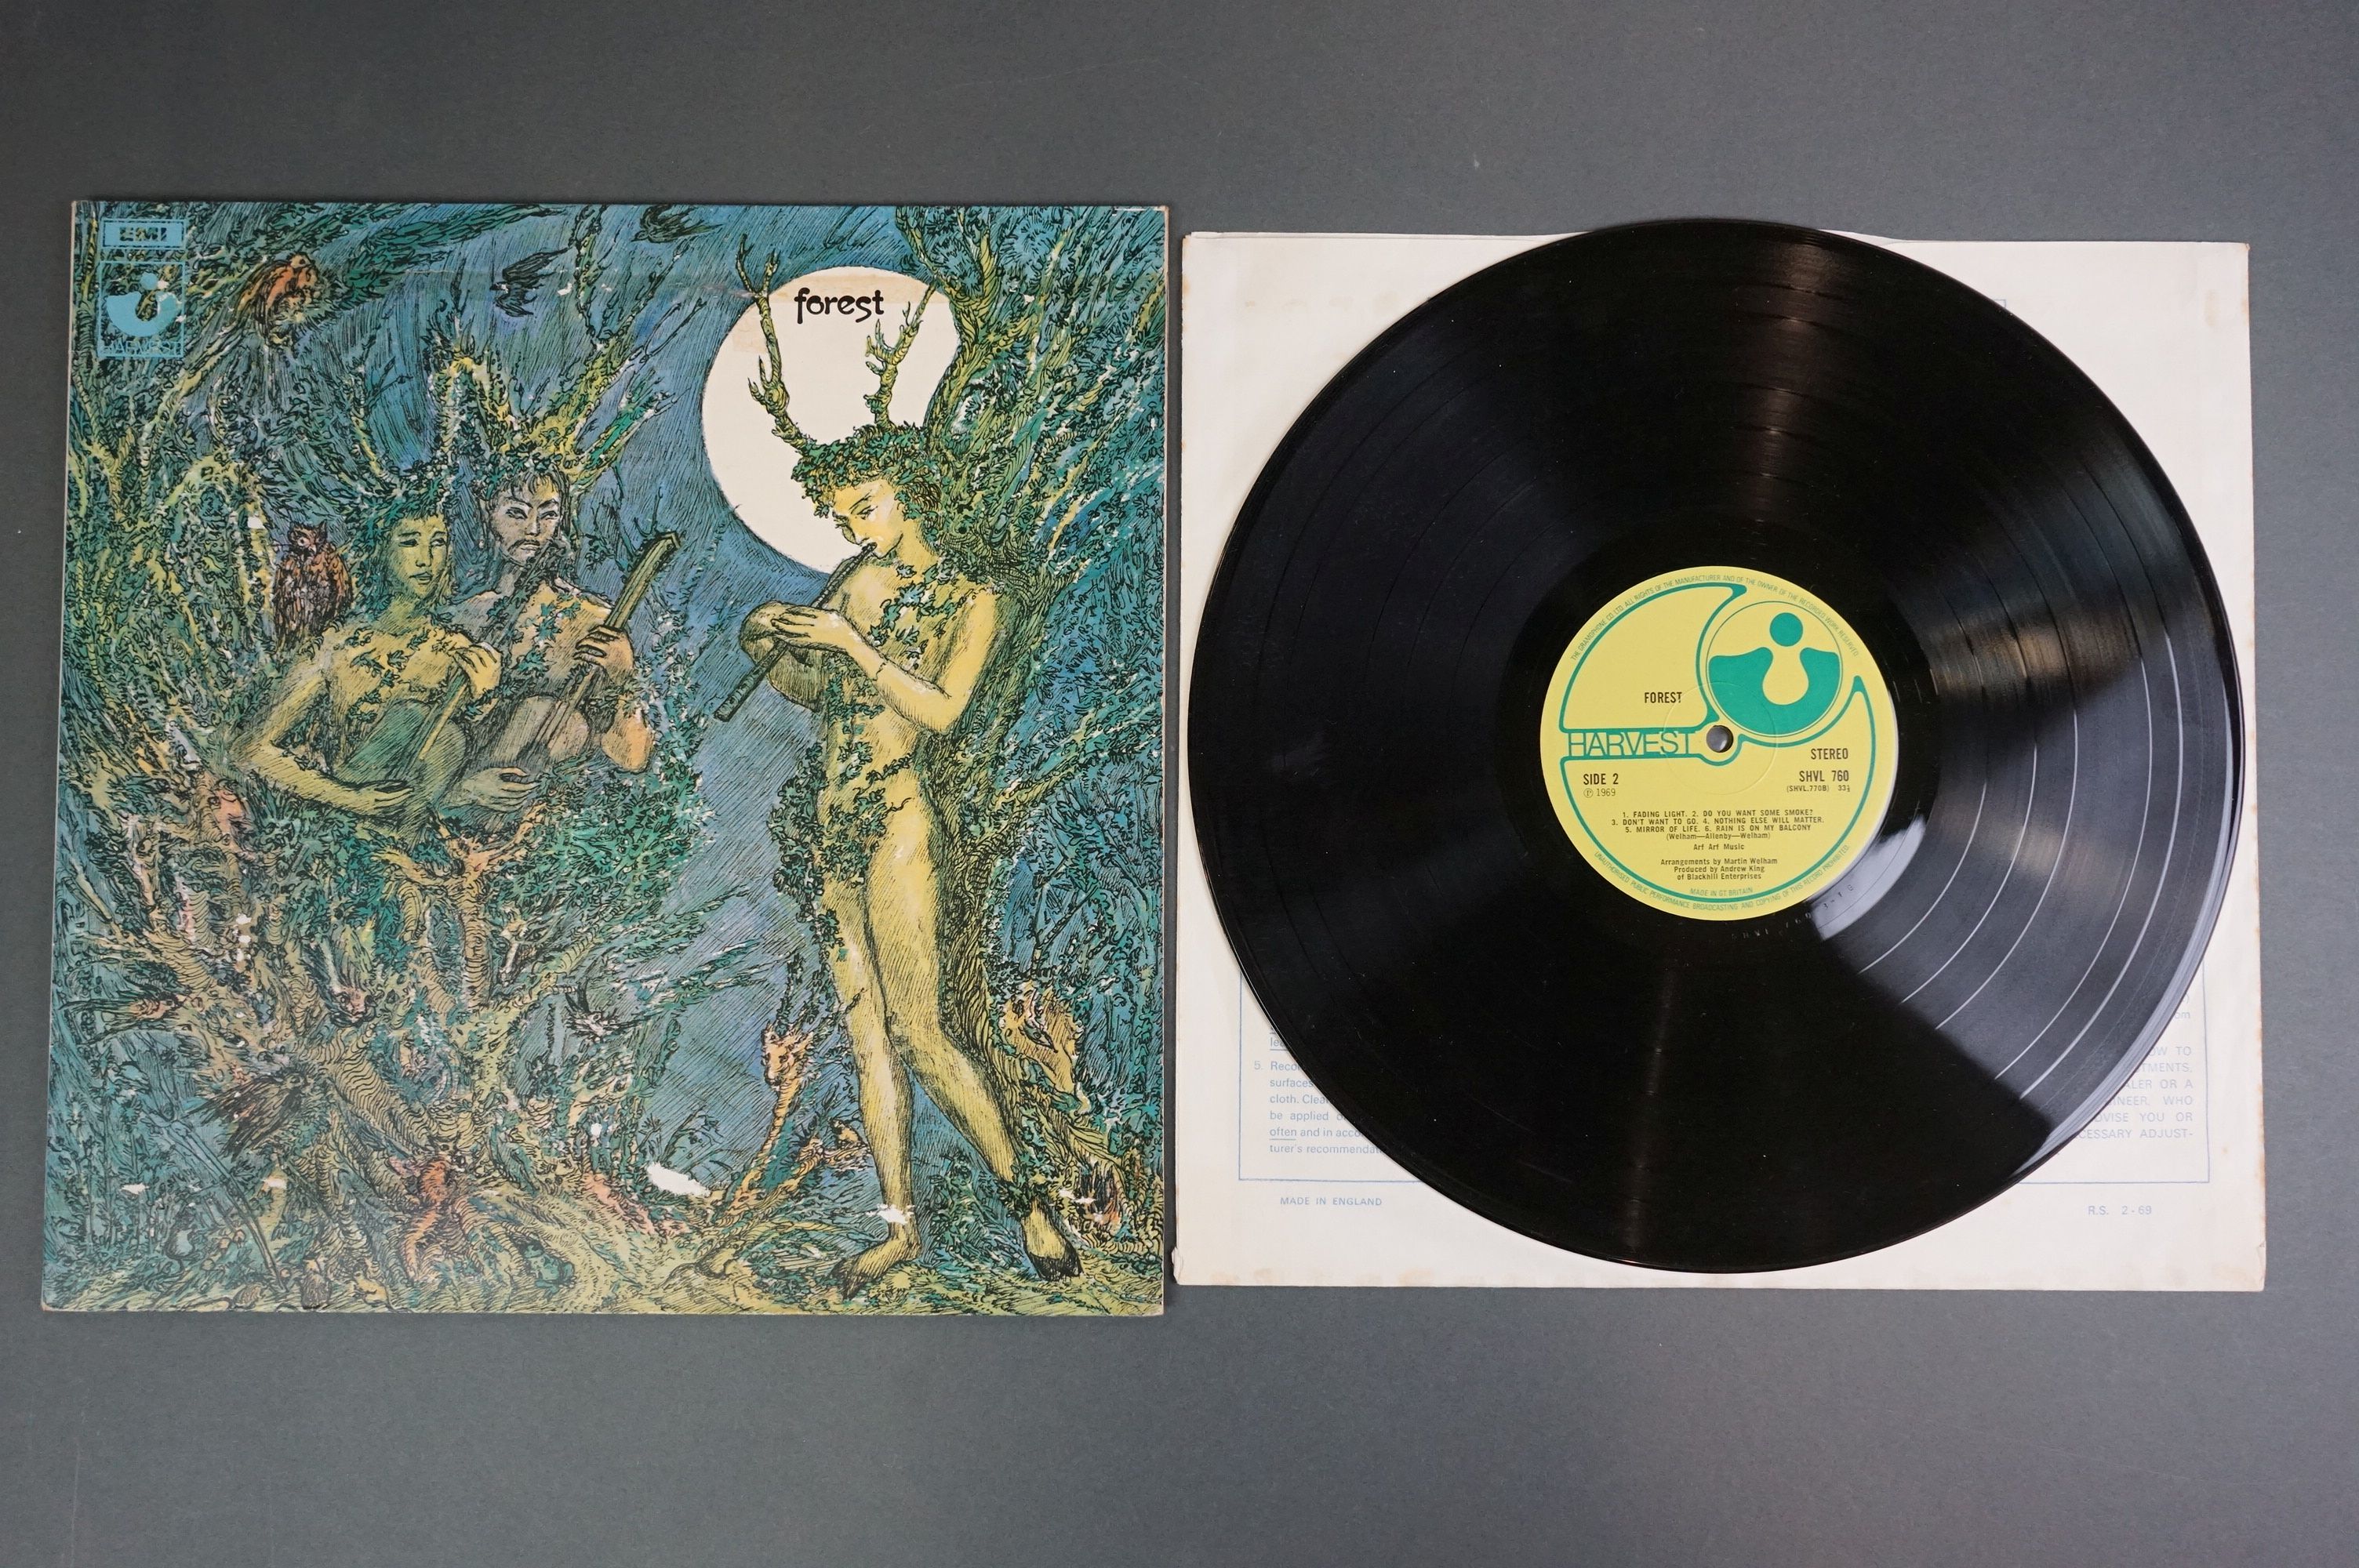 Vinyl - Three Forest LPs to include self titled on Harvest SHVL760 no EMI on label, tape removal - Image 2 of 8